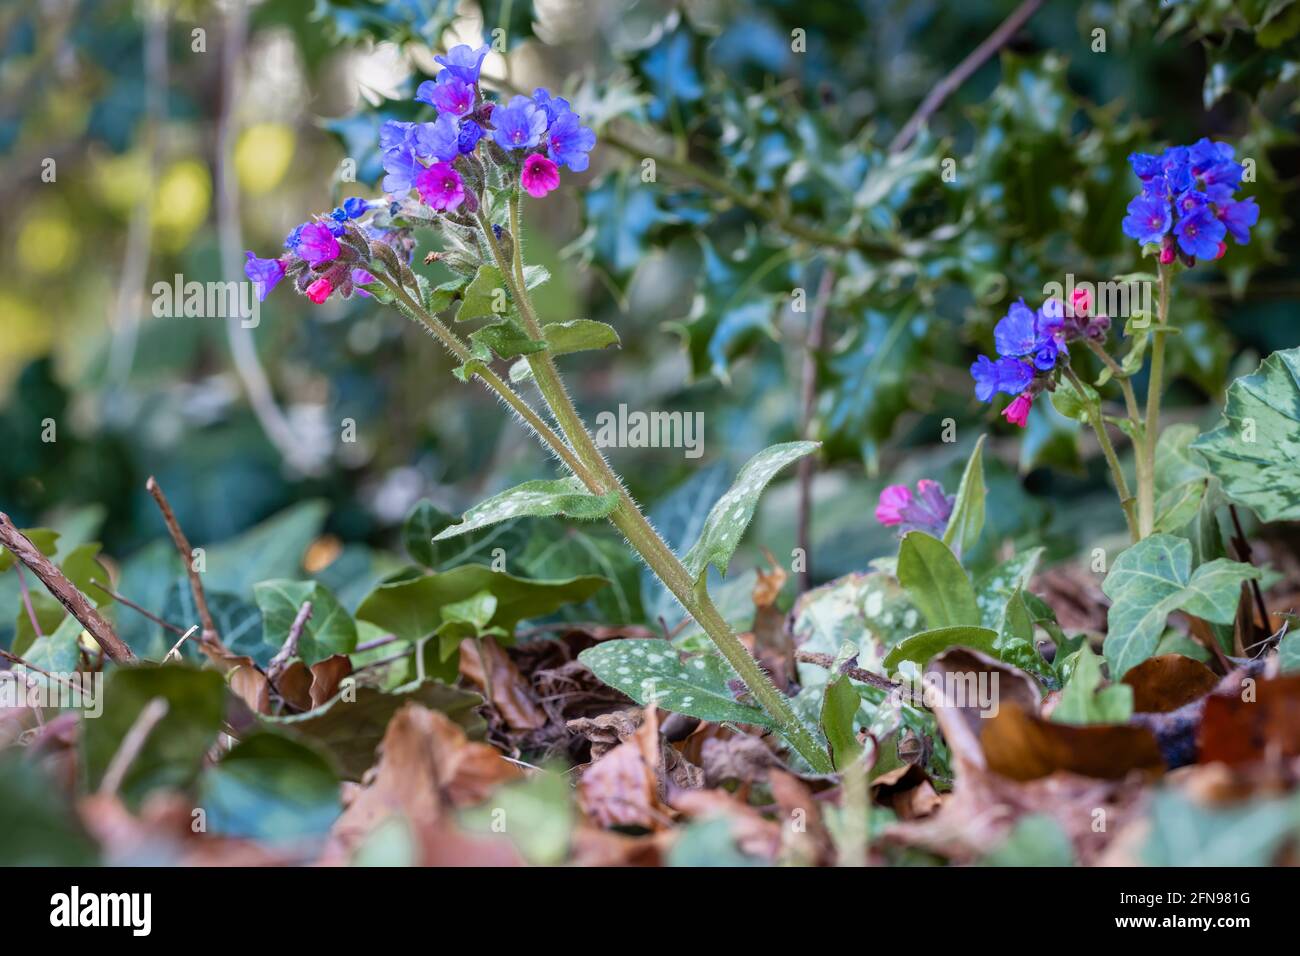 Blue and purple Pulmonaria officinalis (lungwort) with typical spotted leaves, in flower in spring growing in a garden in Surrey, south-east England Stock Photo